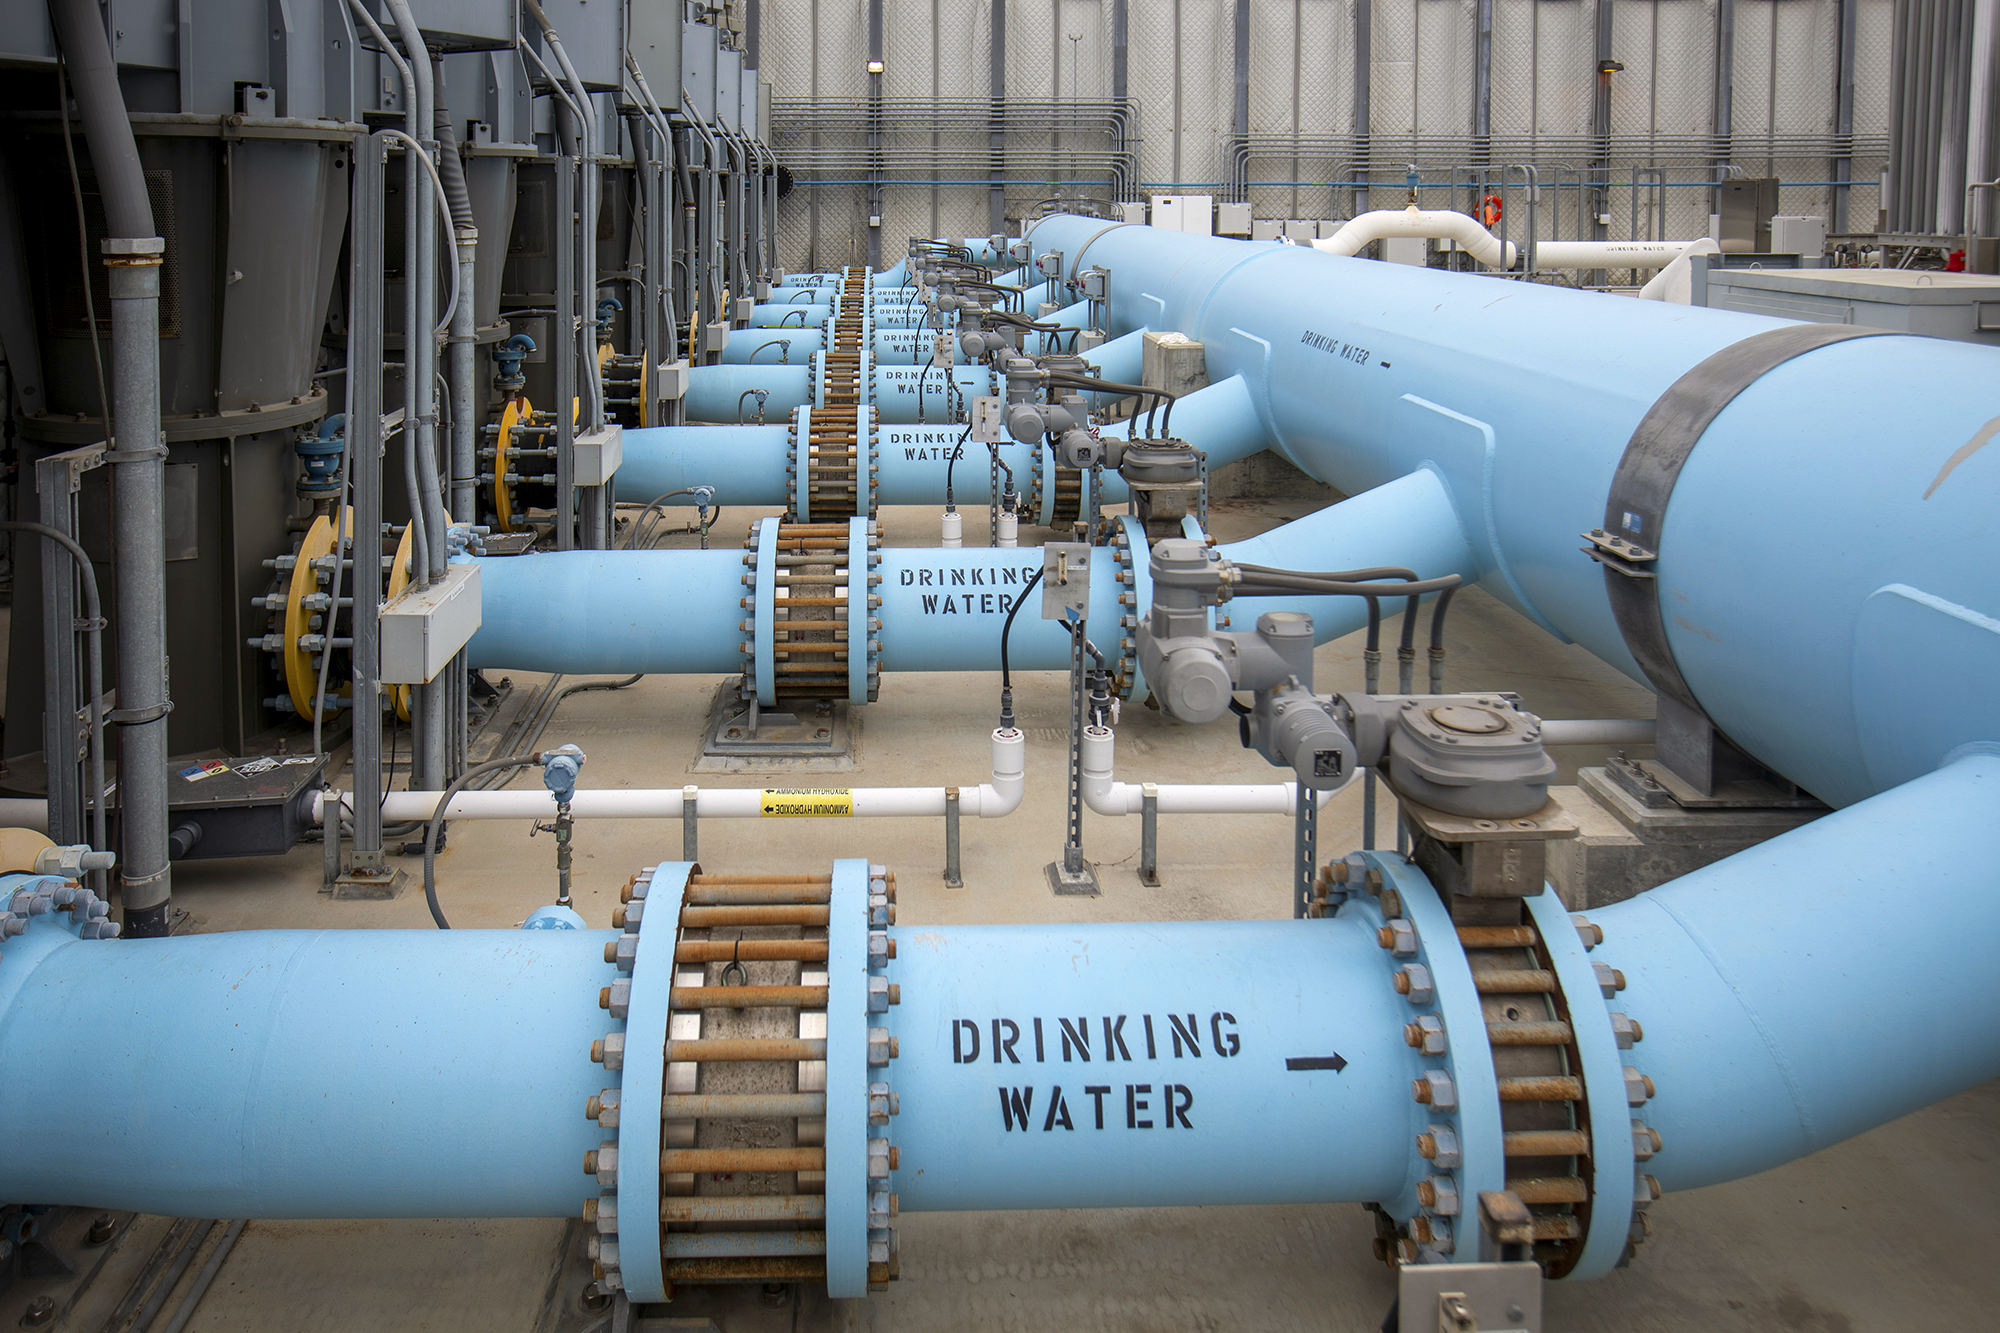 A pivot on desalination plants: California approves project in Orange County